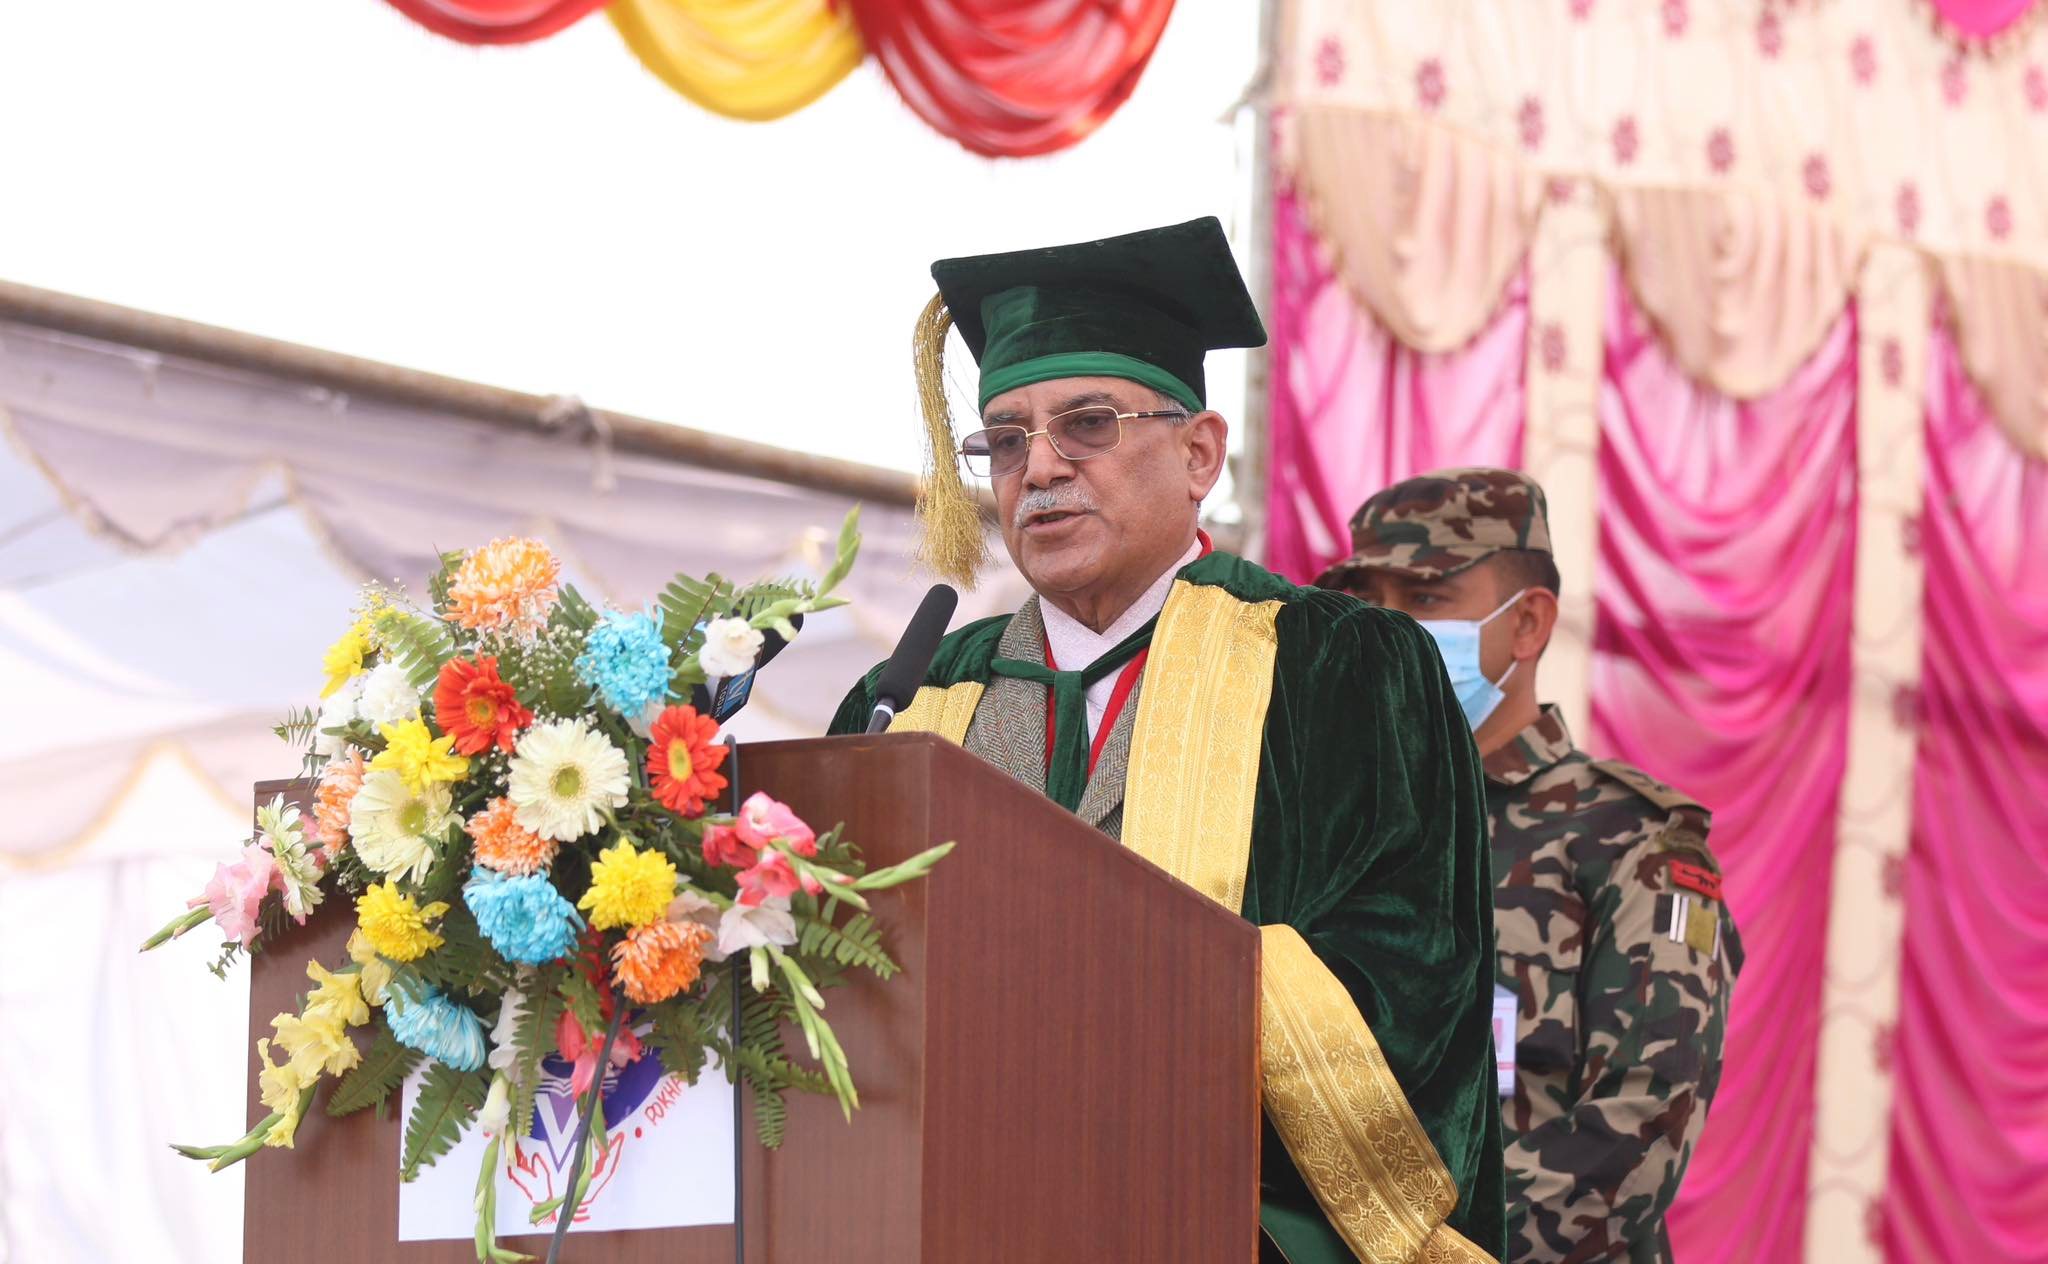 Students should be involved in mitigating effects of climate change: Prachanda